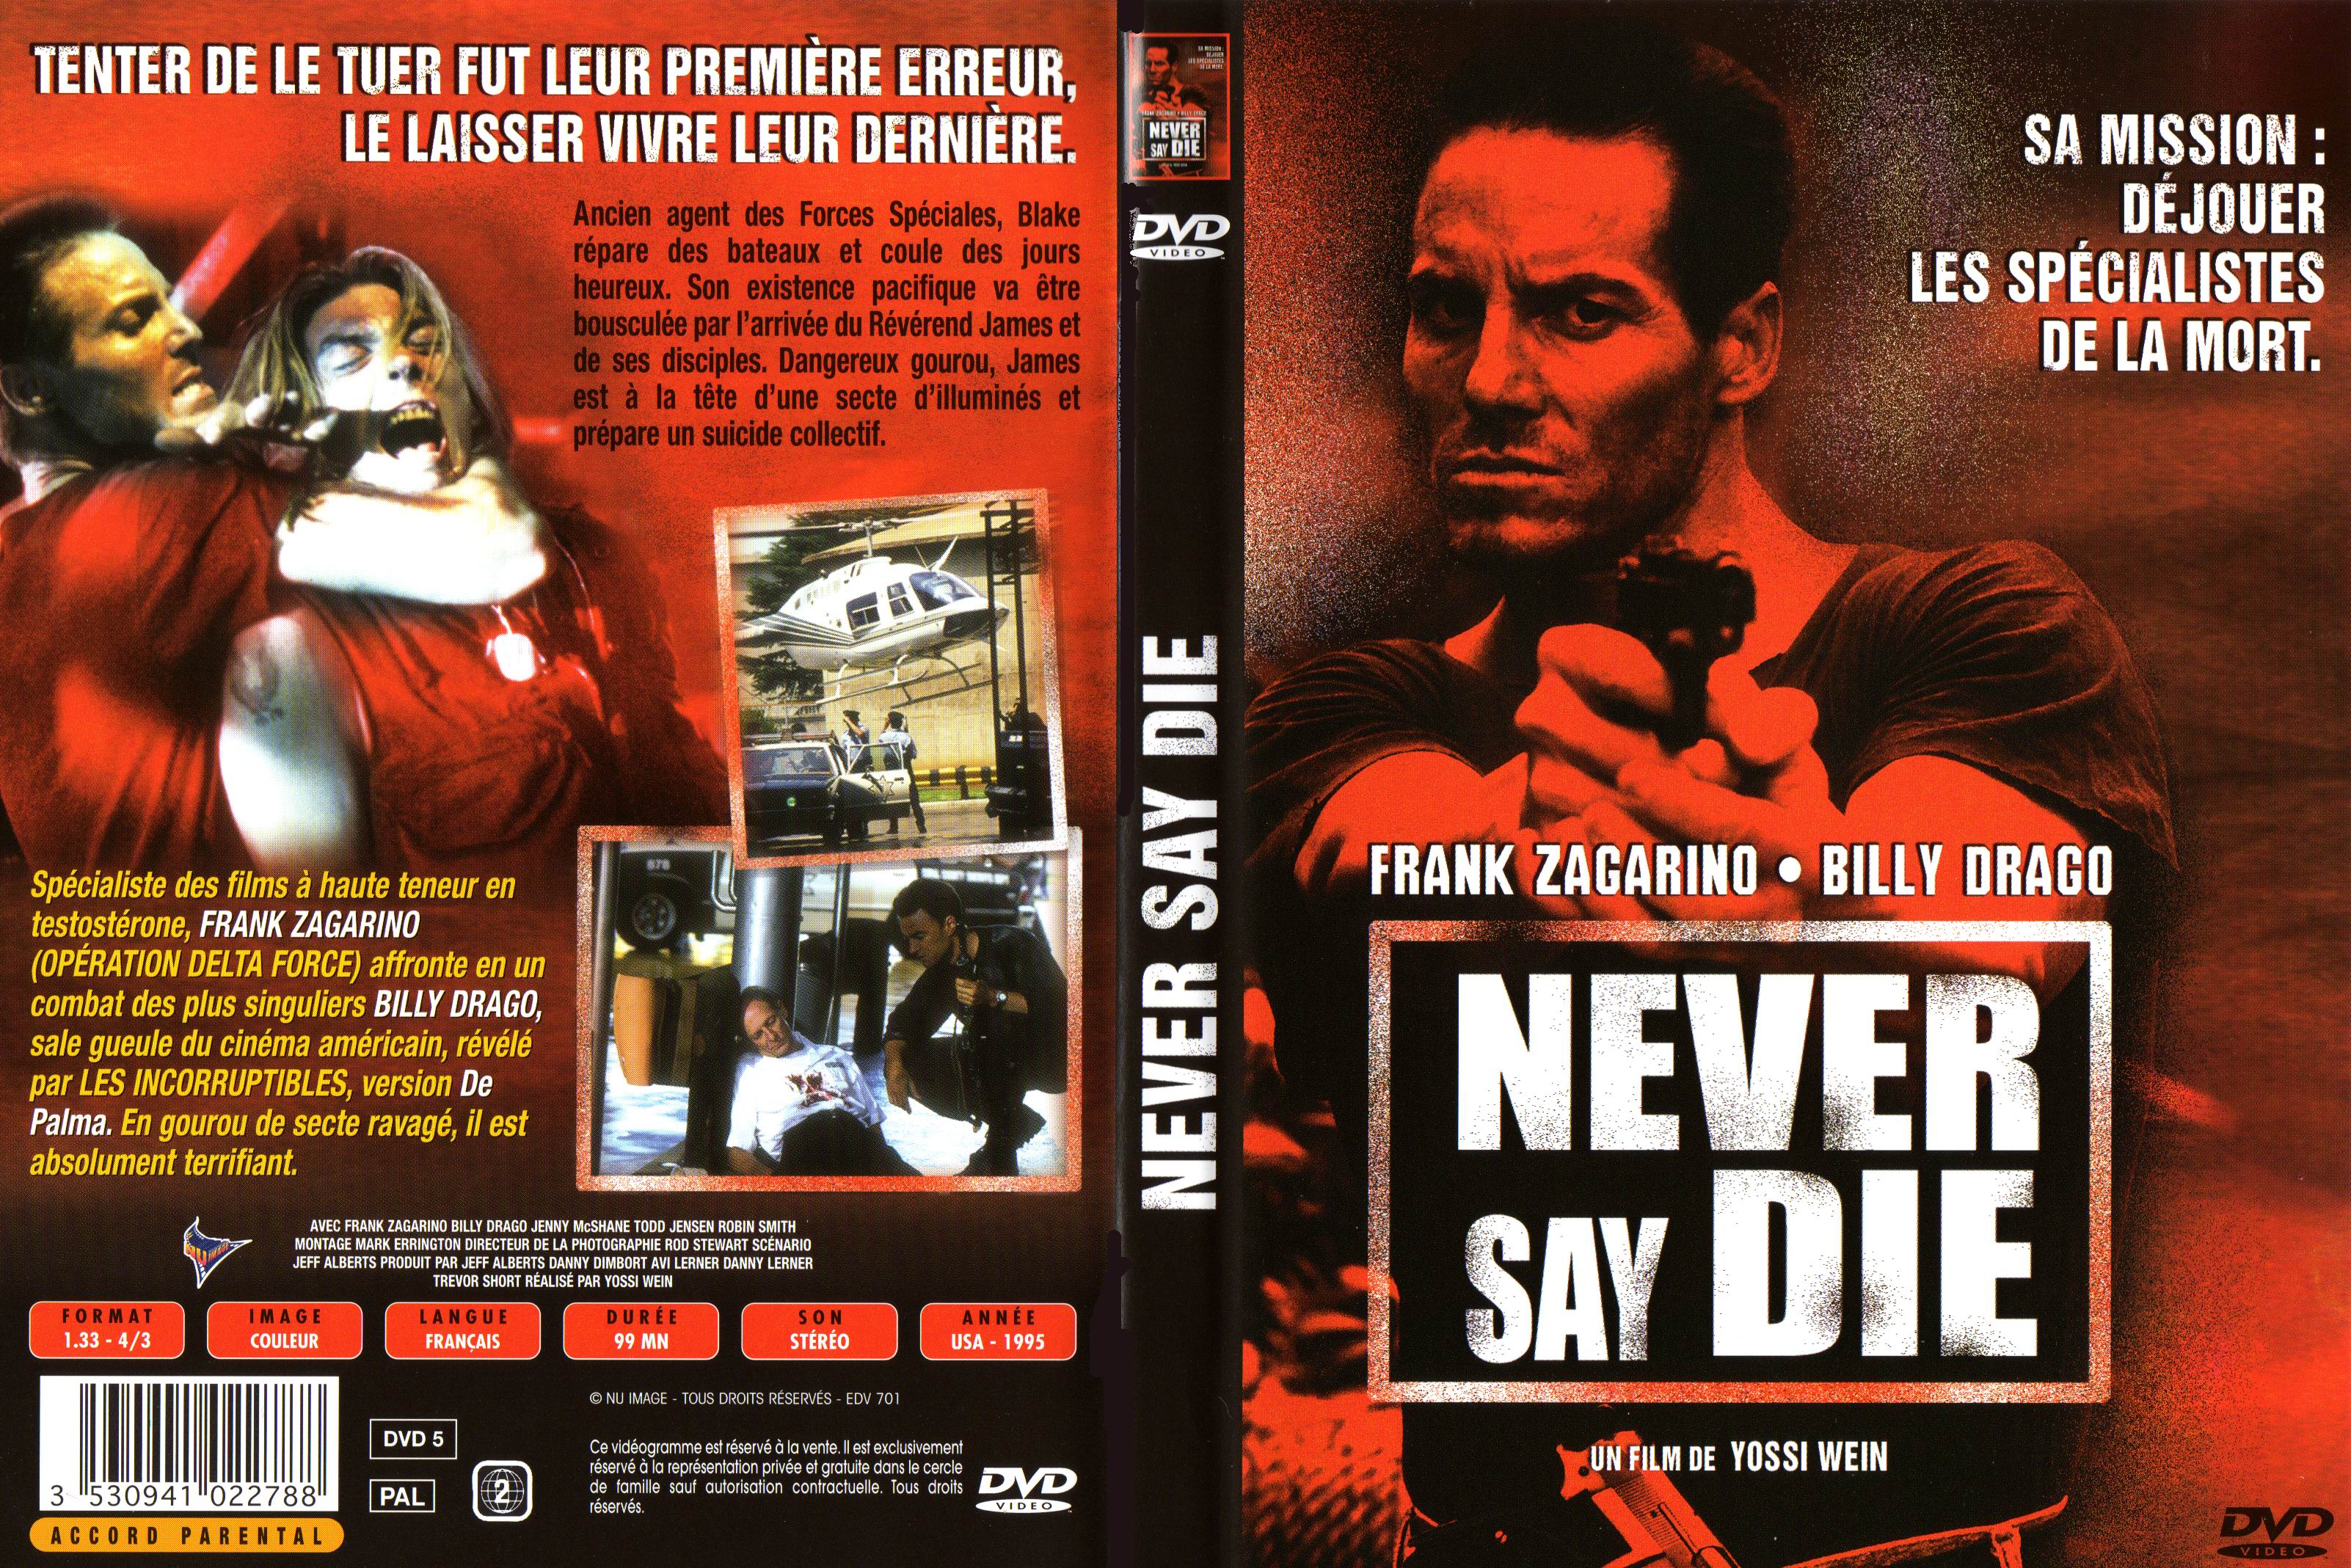 Jaquette DVD Never say die